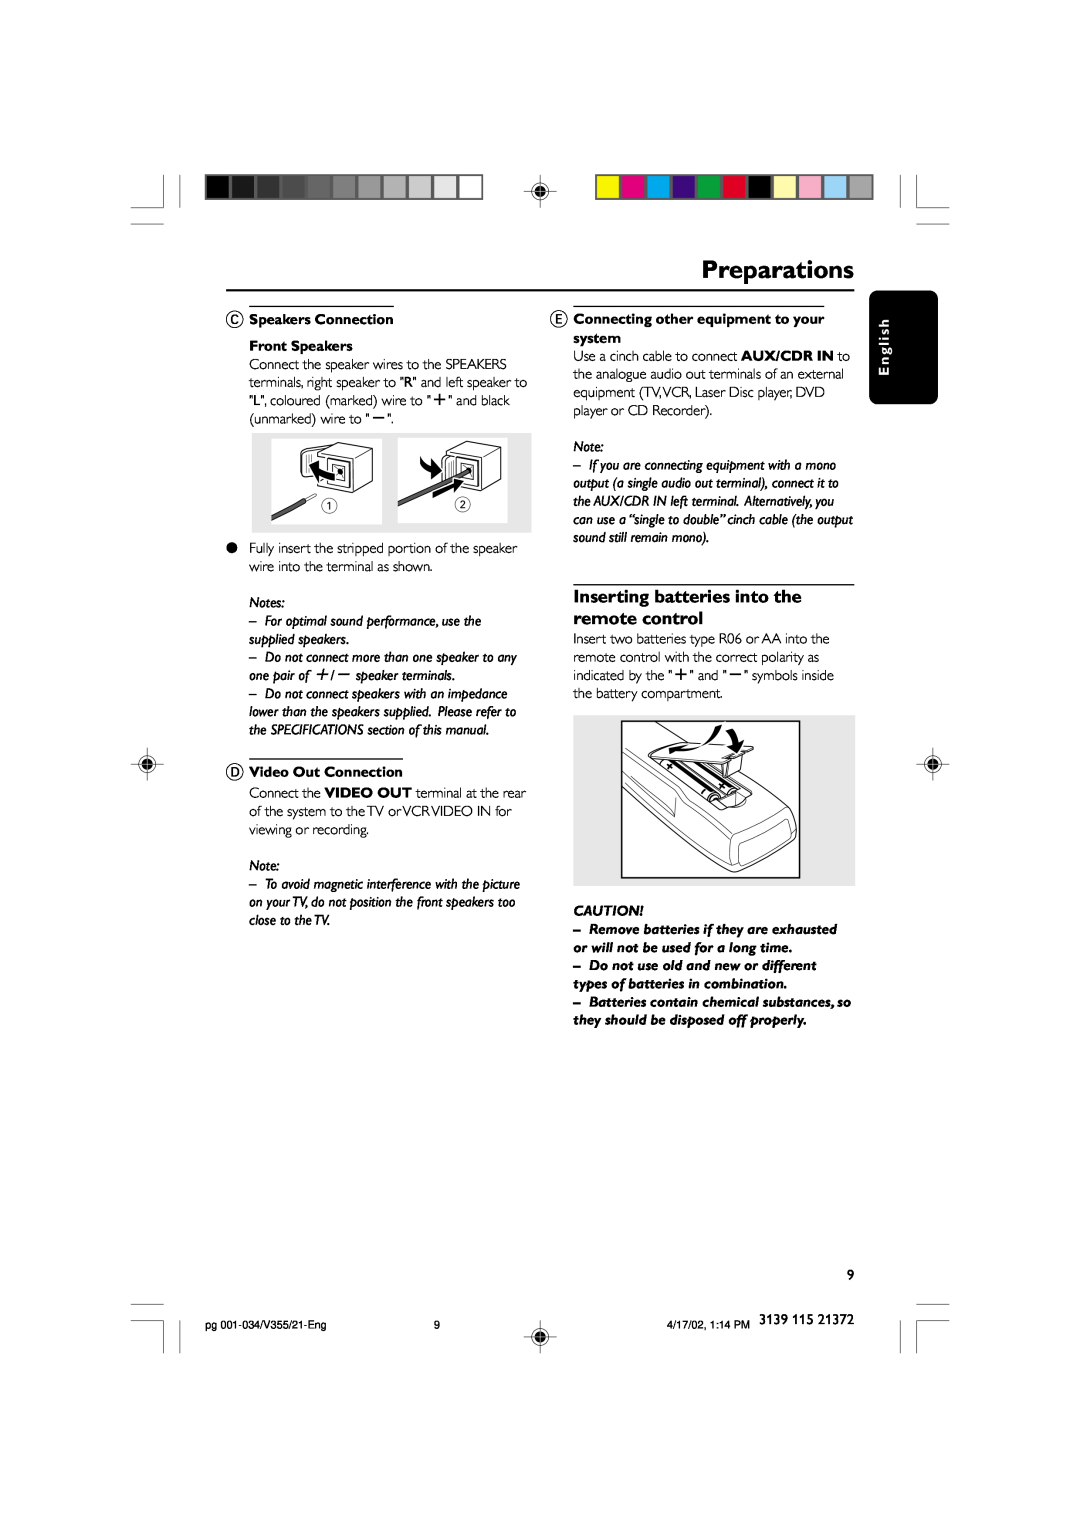 Philips FW-V355 manual Preparations, CSpeakers Connection Front Speakers, DVideo Out Connection, English 